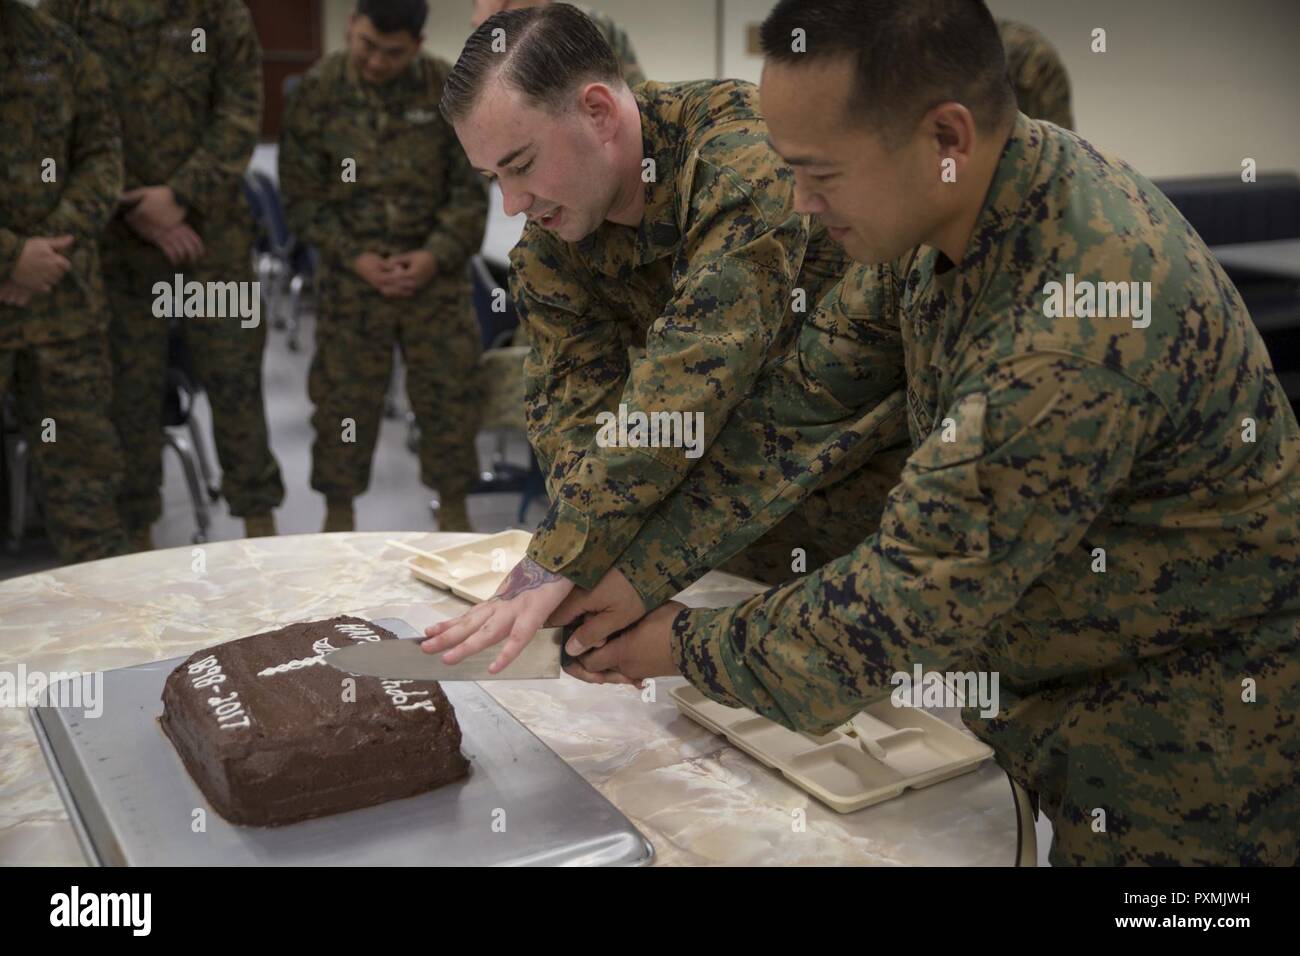 Chief Hospital Corpsman (Fleet Marine Force) Edgar E. Cuenca, right, a preventive medicine technician with Command Element, III Marine Expeditionary Force, and Hospital Corpsman (FMF) Joseph E. Clack, left, a corpsman assigned to 3rd Medical Battalion, 3rd Marine Logistics Group, III MEF, simultaneously cut a ceremonial cake during a celebration for the 119th birthday of the hospital corpsman rate at Camp Mujuk, Pohang, Republic of Korea, June 17, 2017. Marines from Bravo Company, 3rd Law Enforcement Battalion, III Marine Headquarters Group, III MEF and Corpsmen with 3rd Med Bn, 3rd MLG, III M Stock Photo